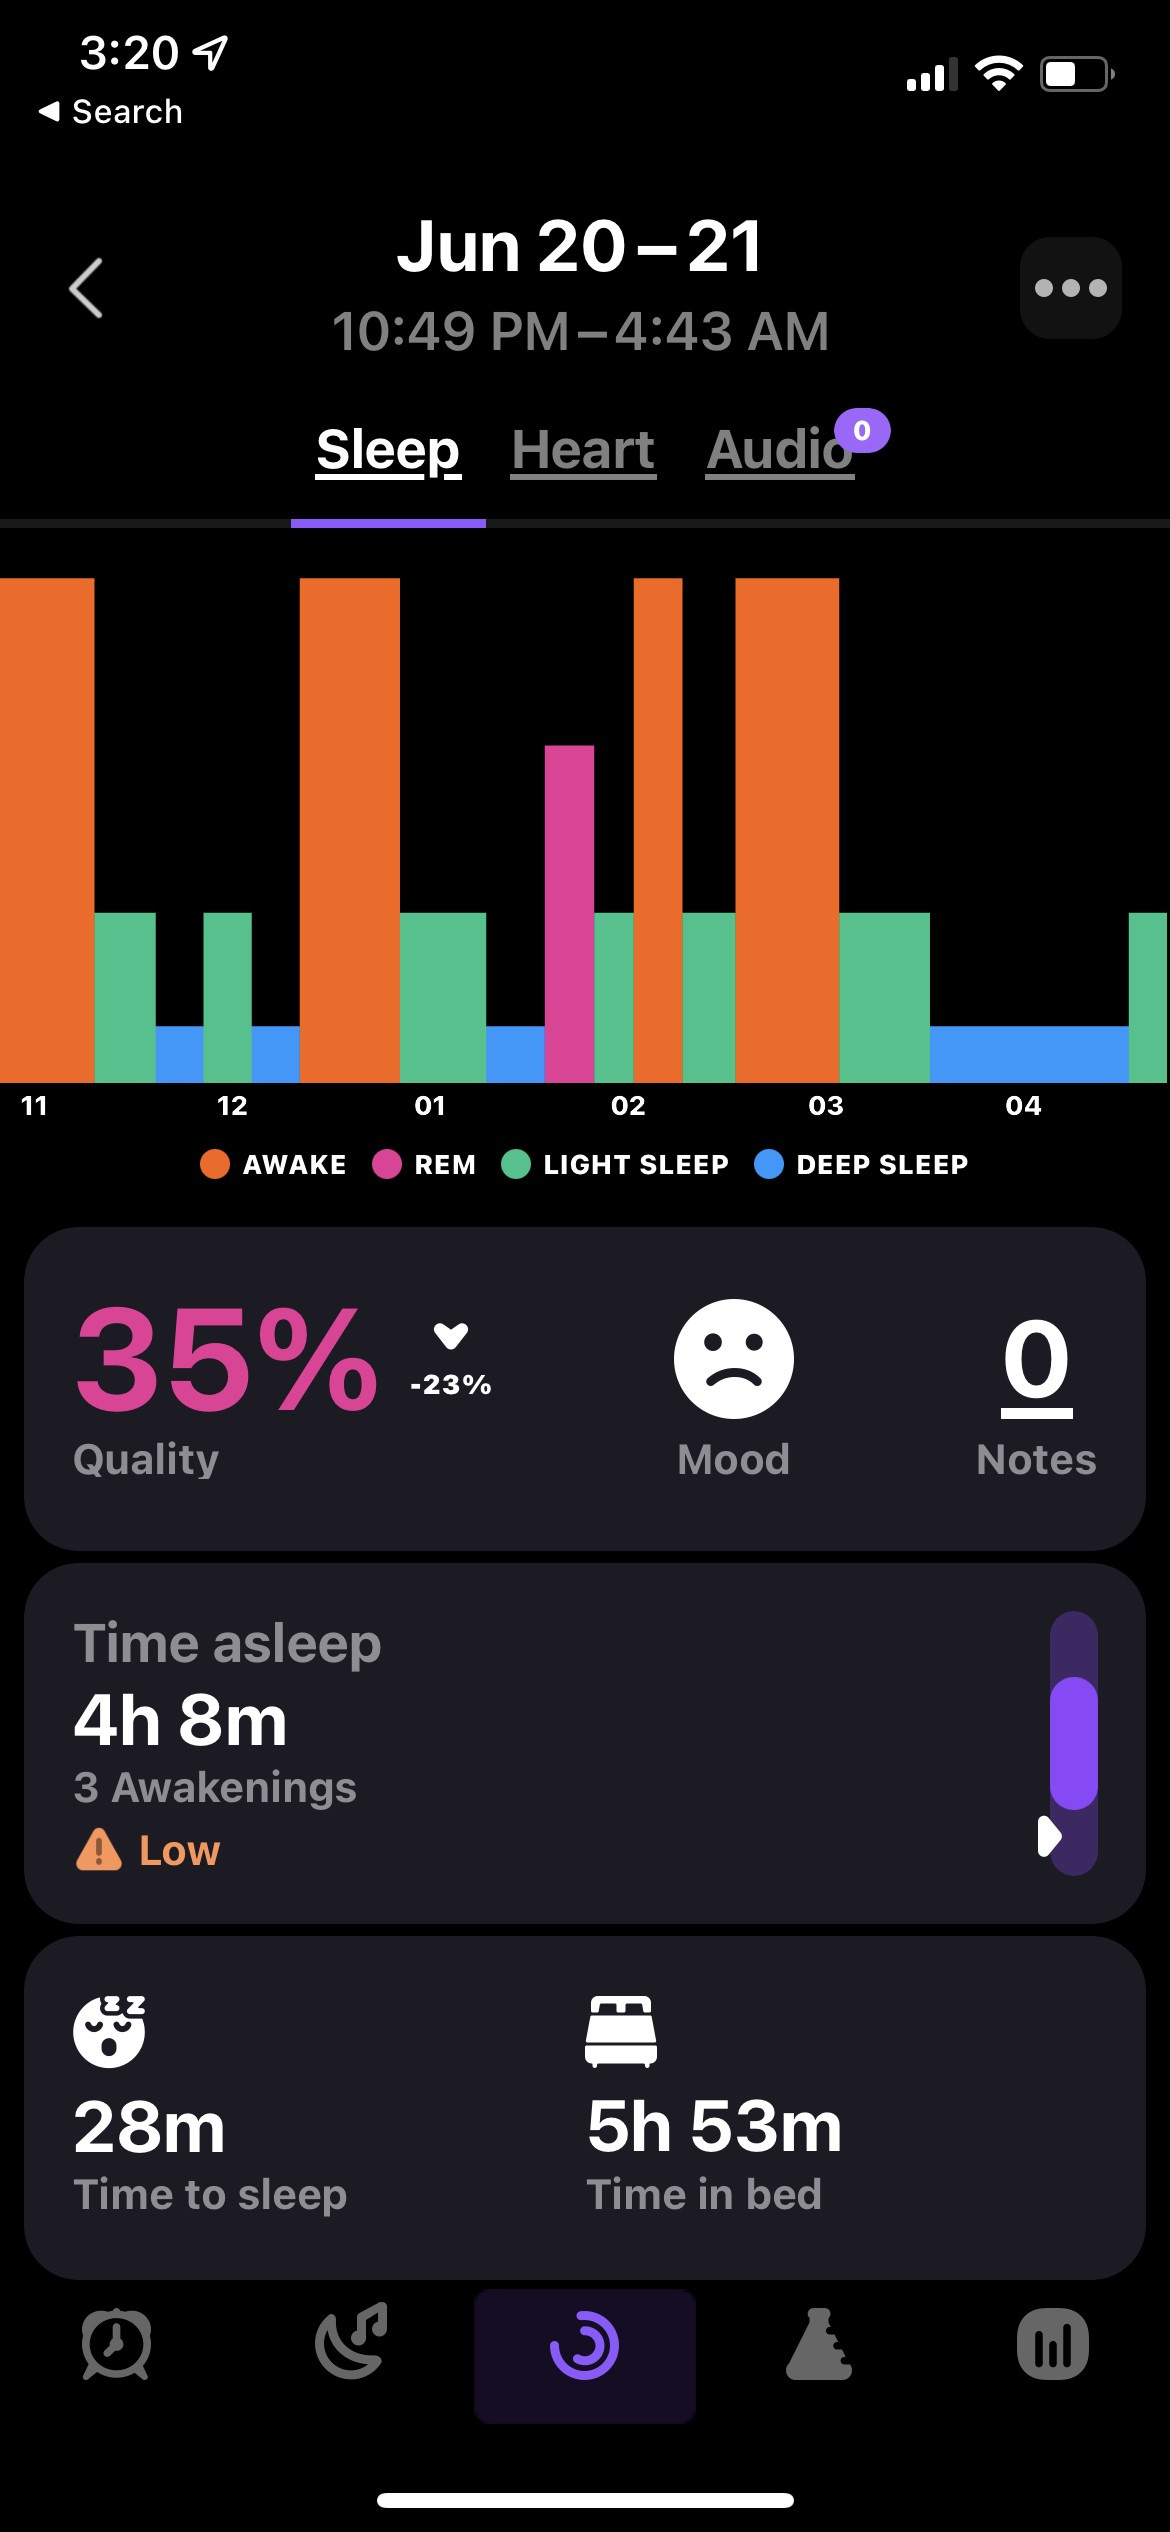 A screenshot from the sleep tracker app Pillow displaying the author’s poor night’s sleep last night.